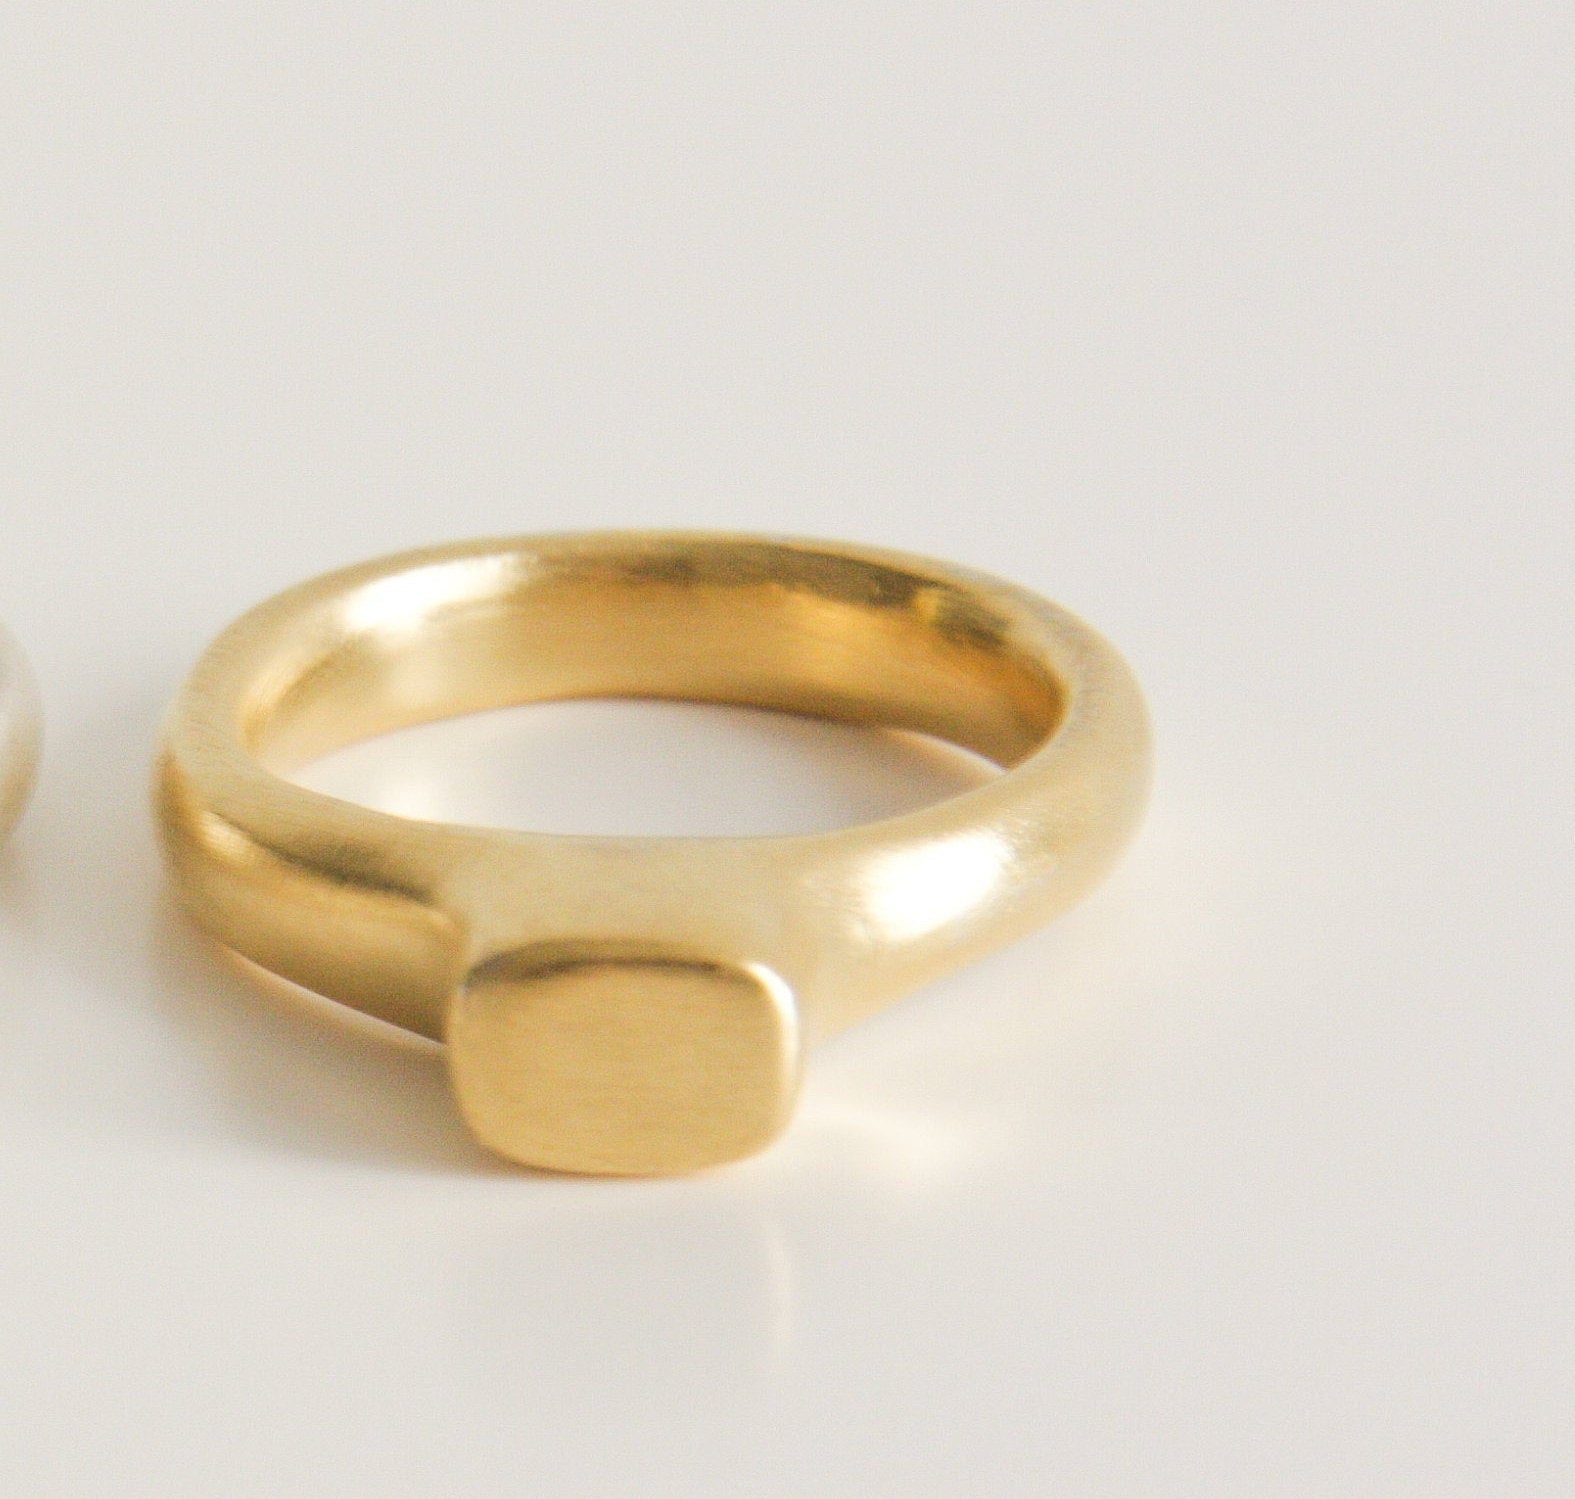 Minimalist Signet 14K Yellow Gold Ring / Square Gold Ring - hs